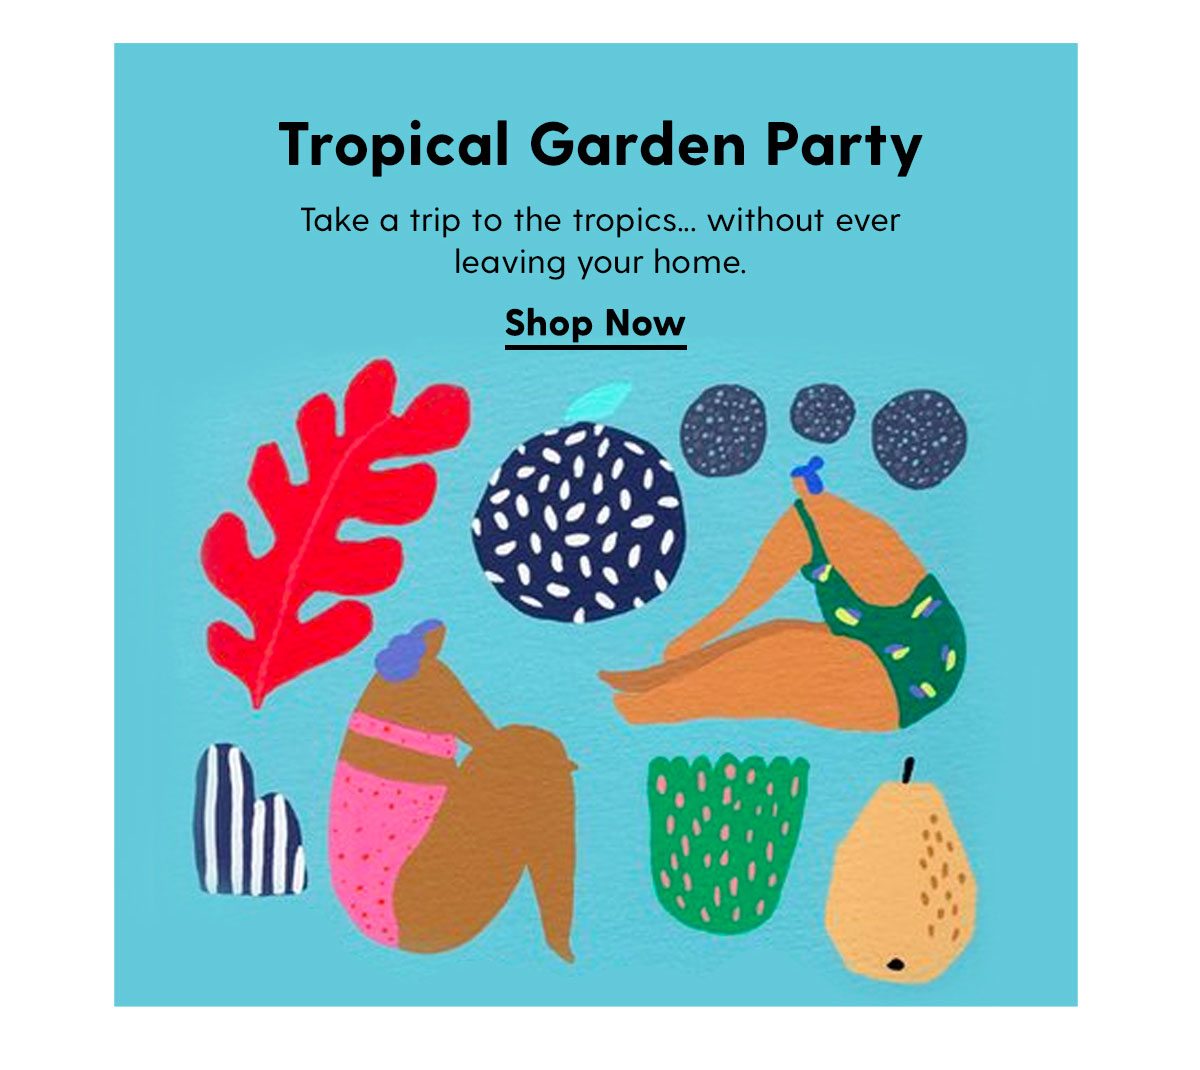 Tropical Garden Party: Take a trip to the tropics... without ever leaving your home. Shop Now